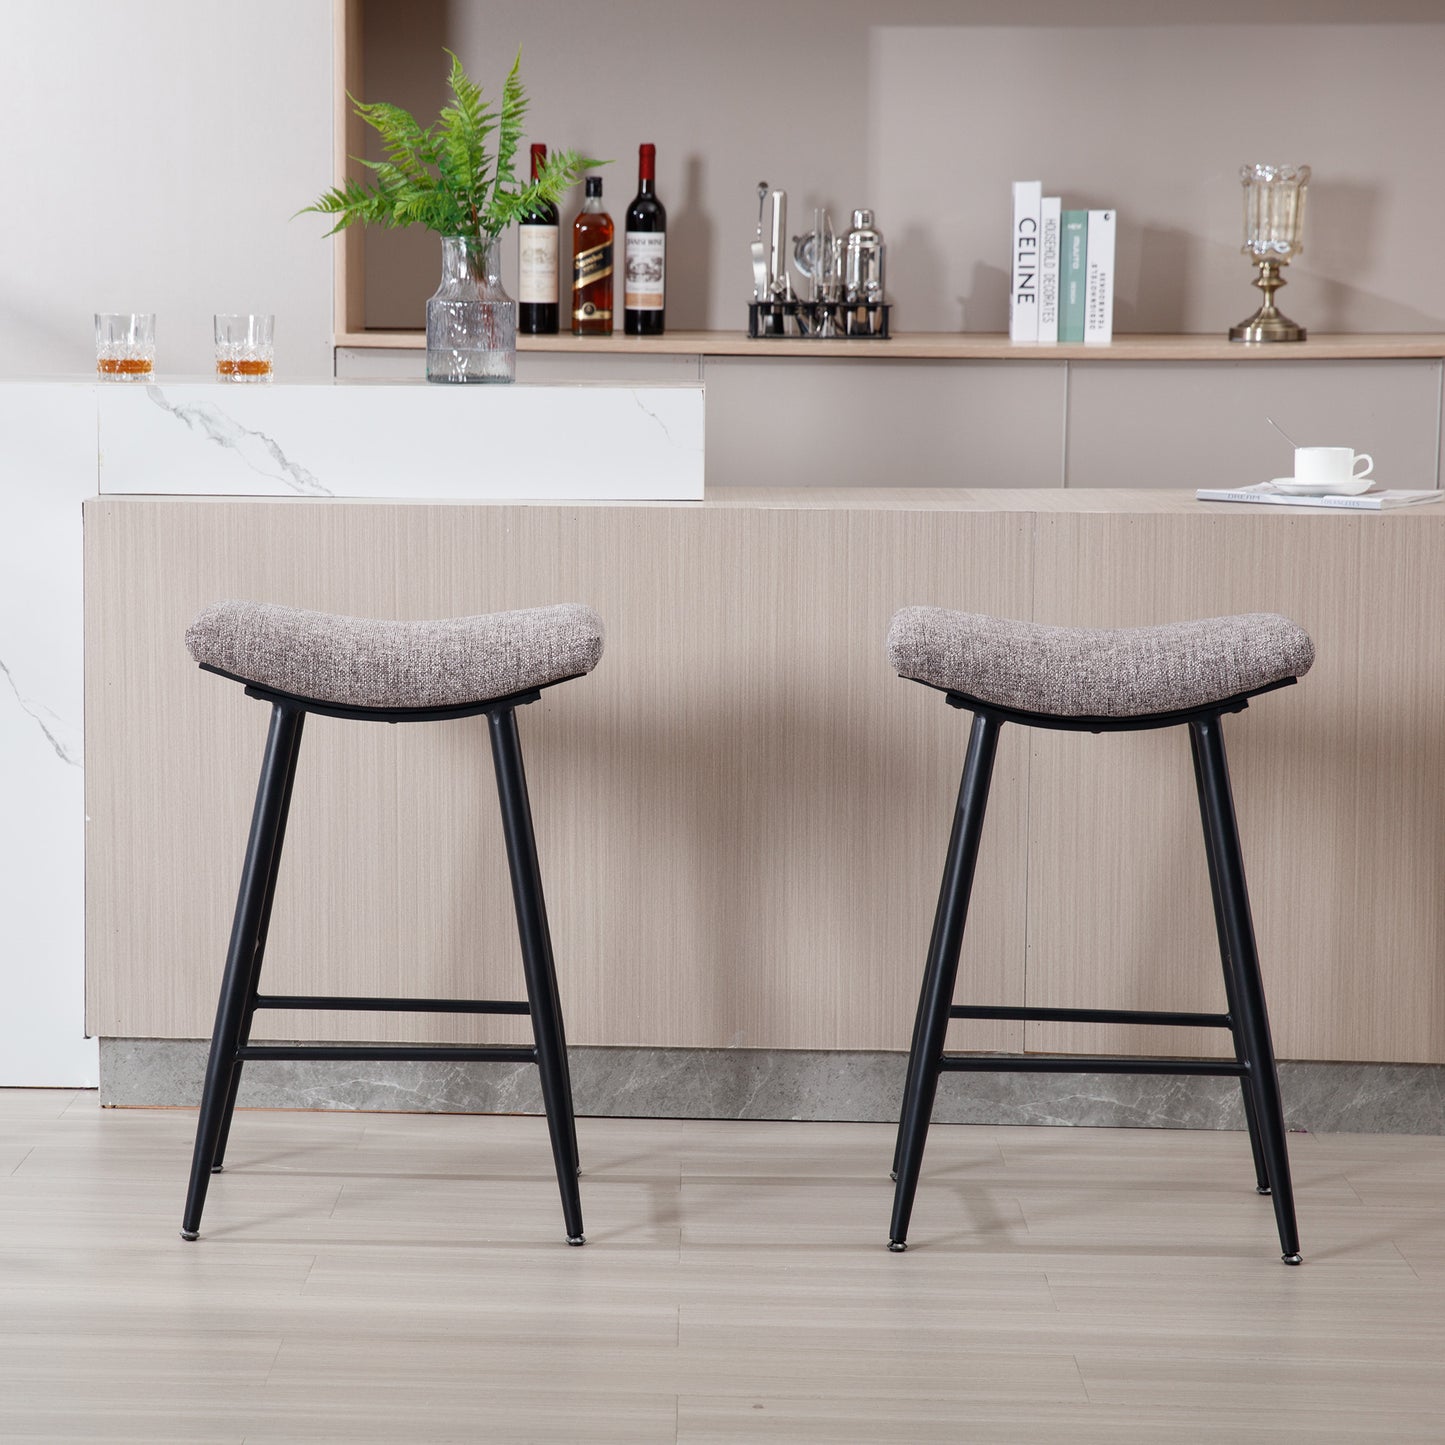 Bar Stools Set of 2 Armless Counter Low Bar Stools Without Back Modern Linen fabric Breakfast Stools with Metal Leg and Footrest,Coffee